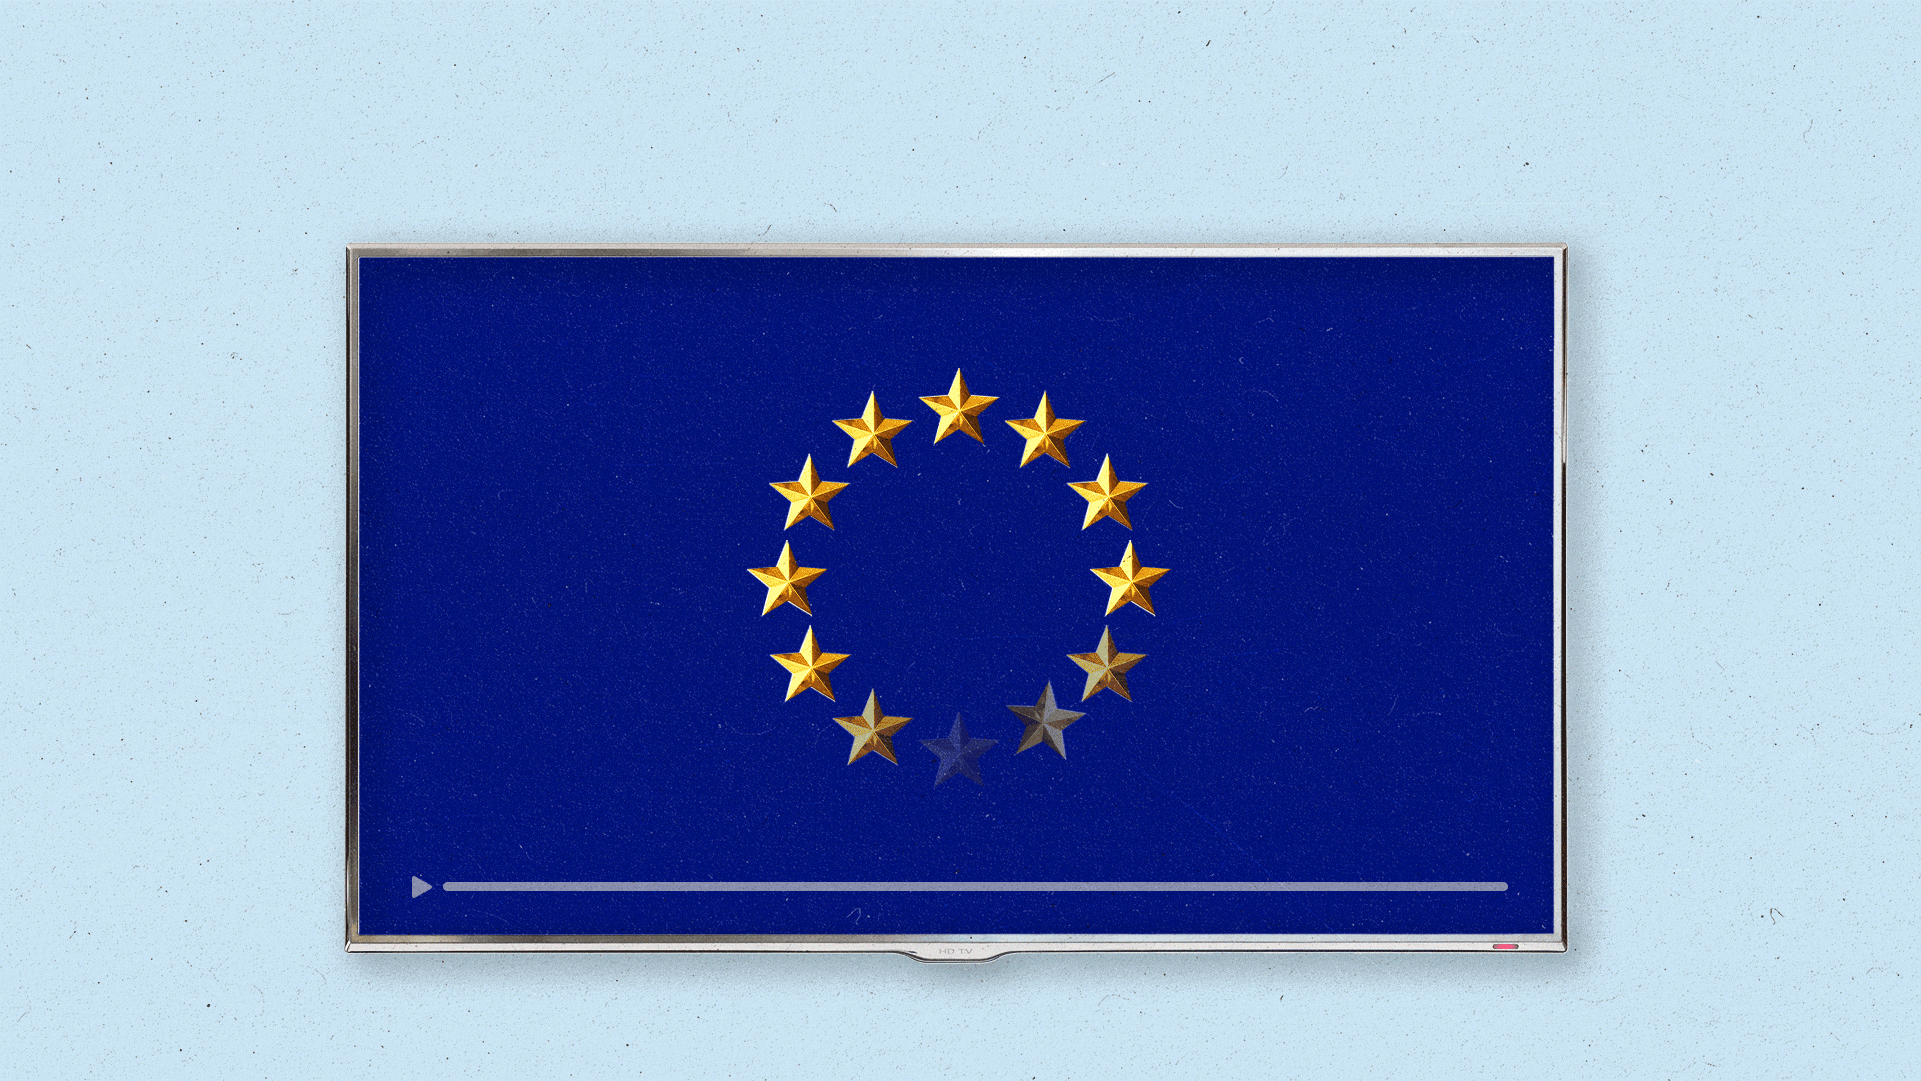 A modern TV screen shows the blue of the EU flag with 12 gold stars/ The stars blink in and out in the form of a screen loading circle.